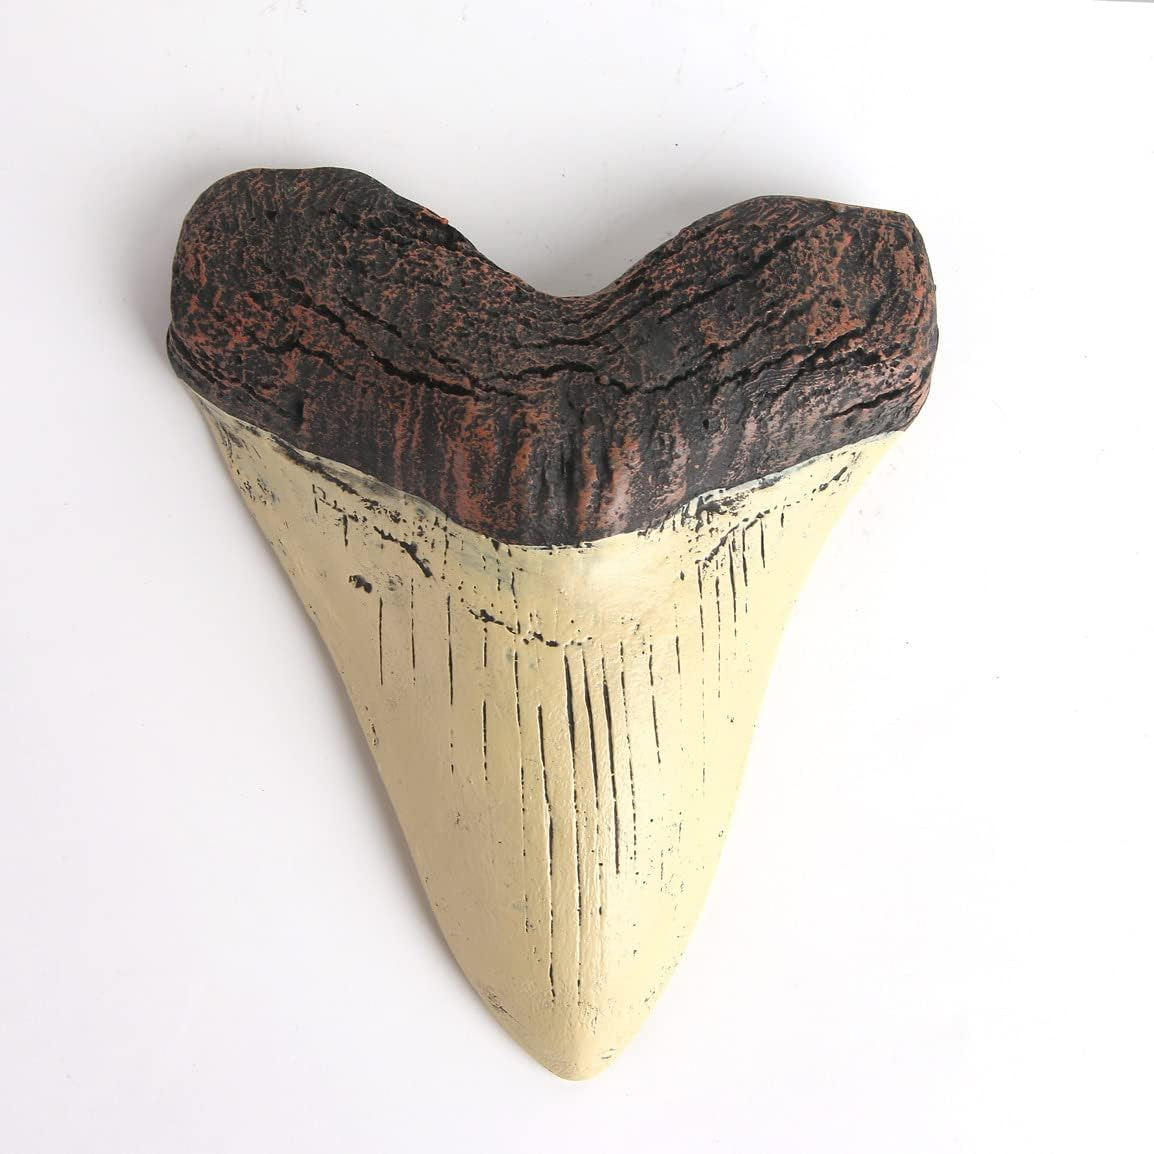 5.5 Inch Megalodon (Carcharodon Megalodon) Tooth, Ivory Color with Serrations(Re